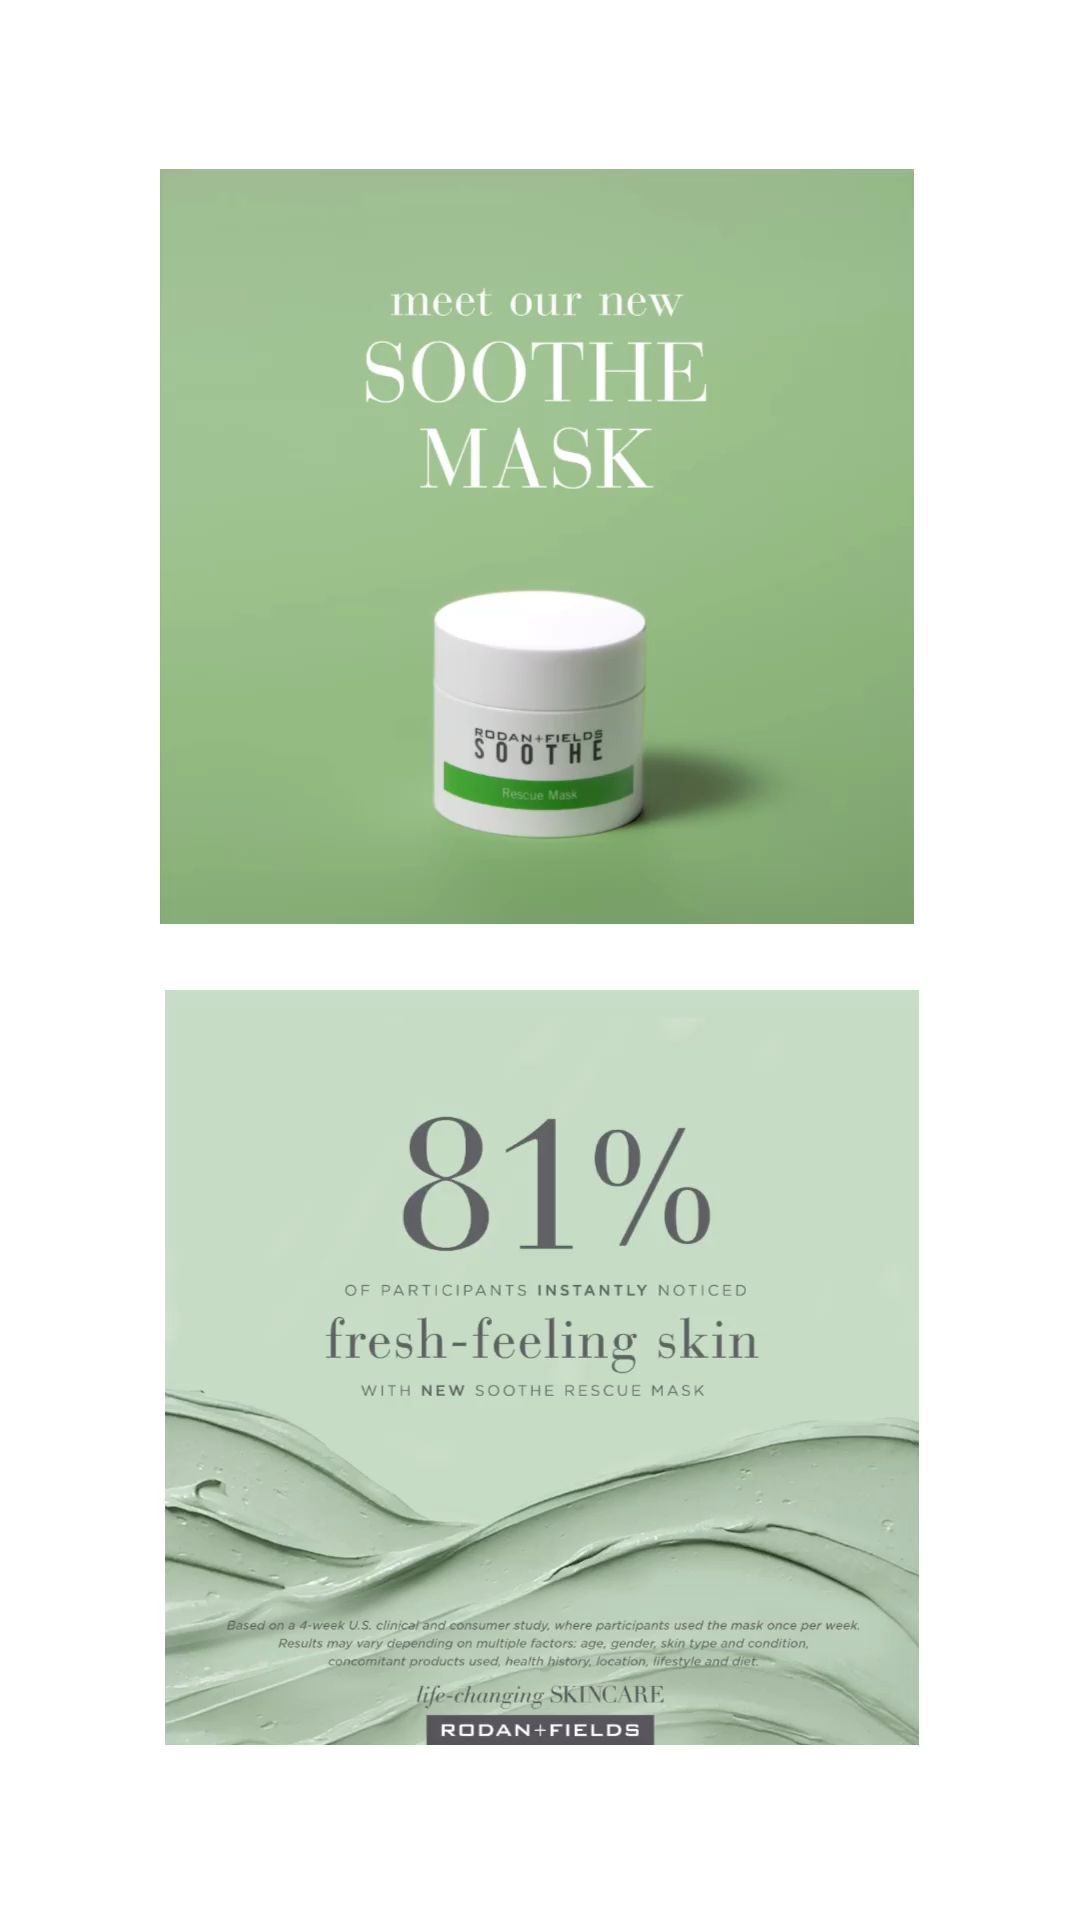 Meet our new SOOTHE MASK - Meet our new SOOTHE MASK -   14 beauty Products ads ideas